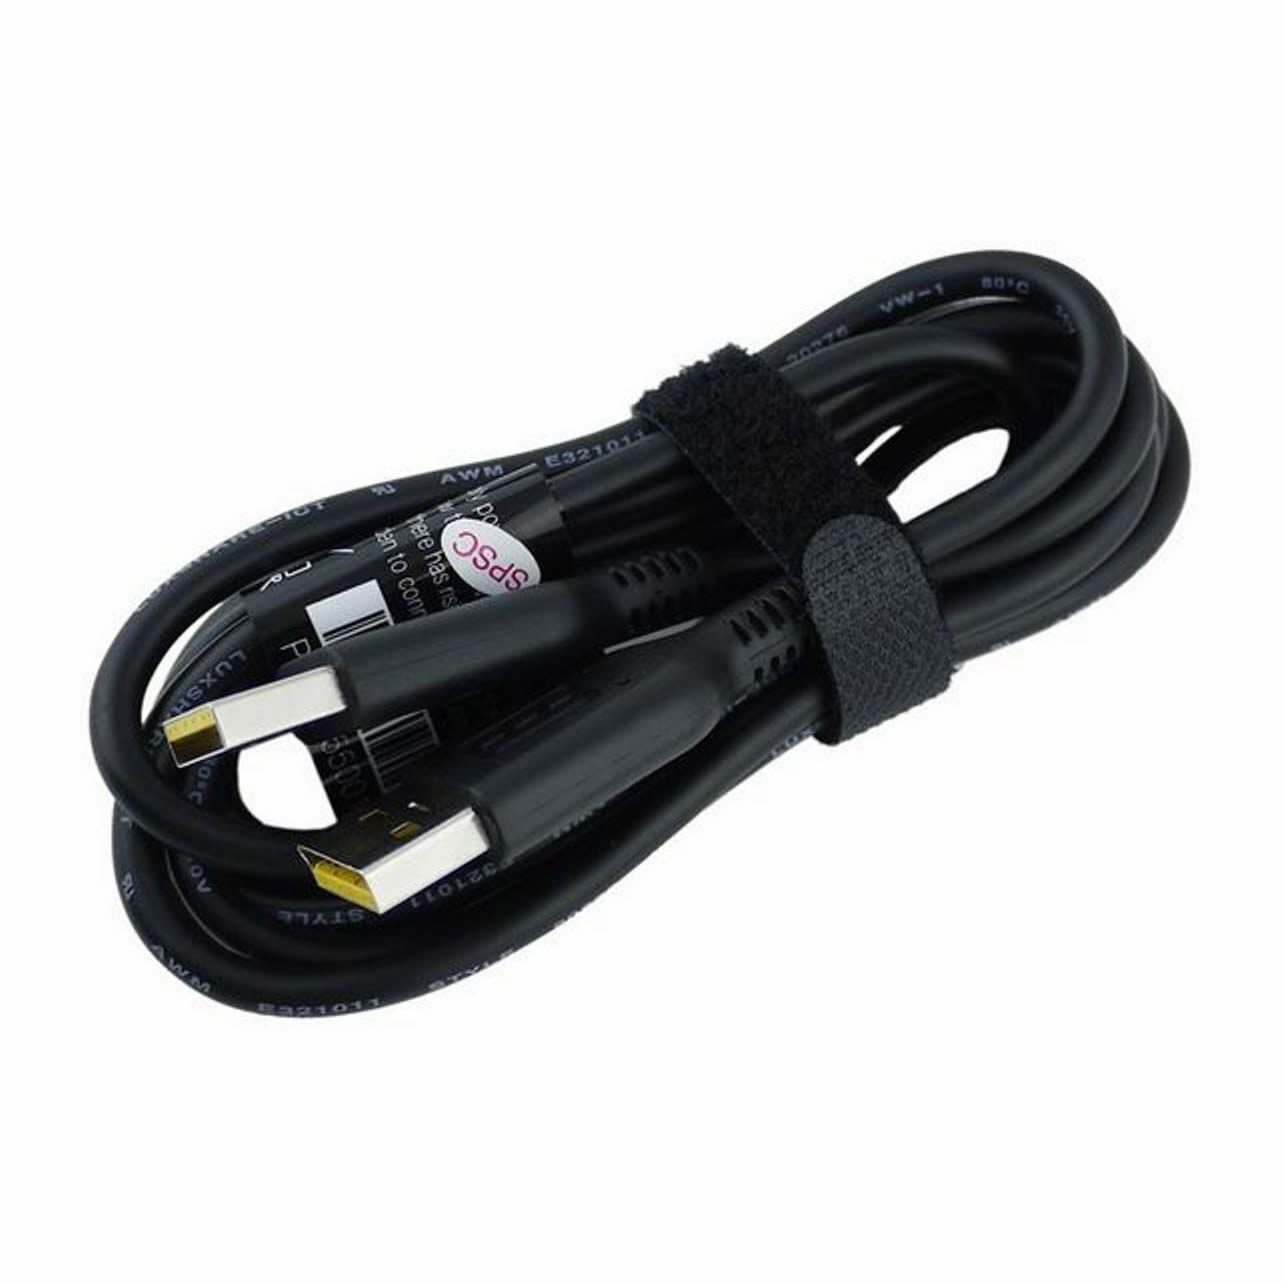 adl40wlb laptop ac adapter